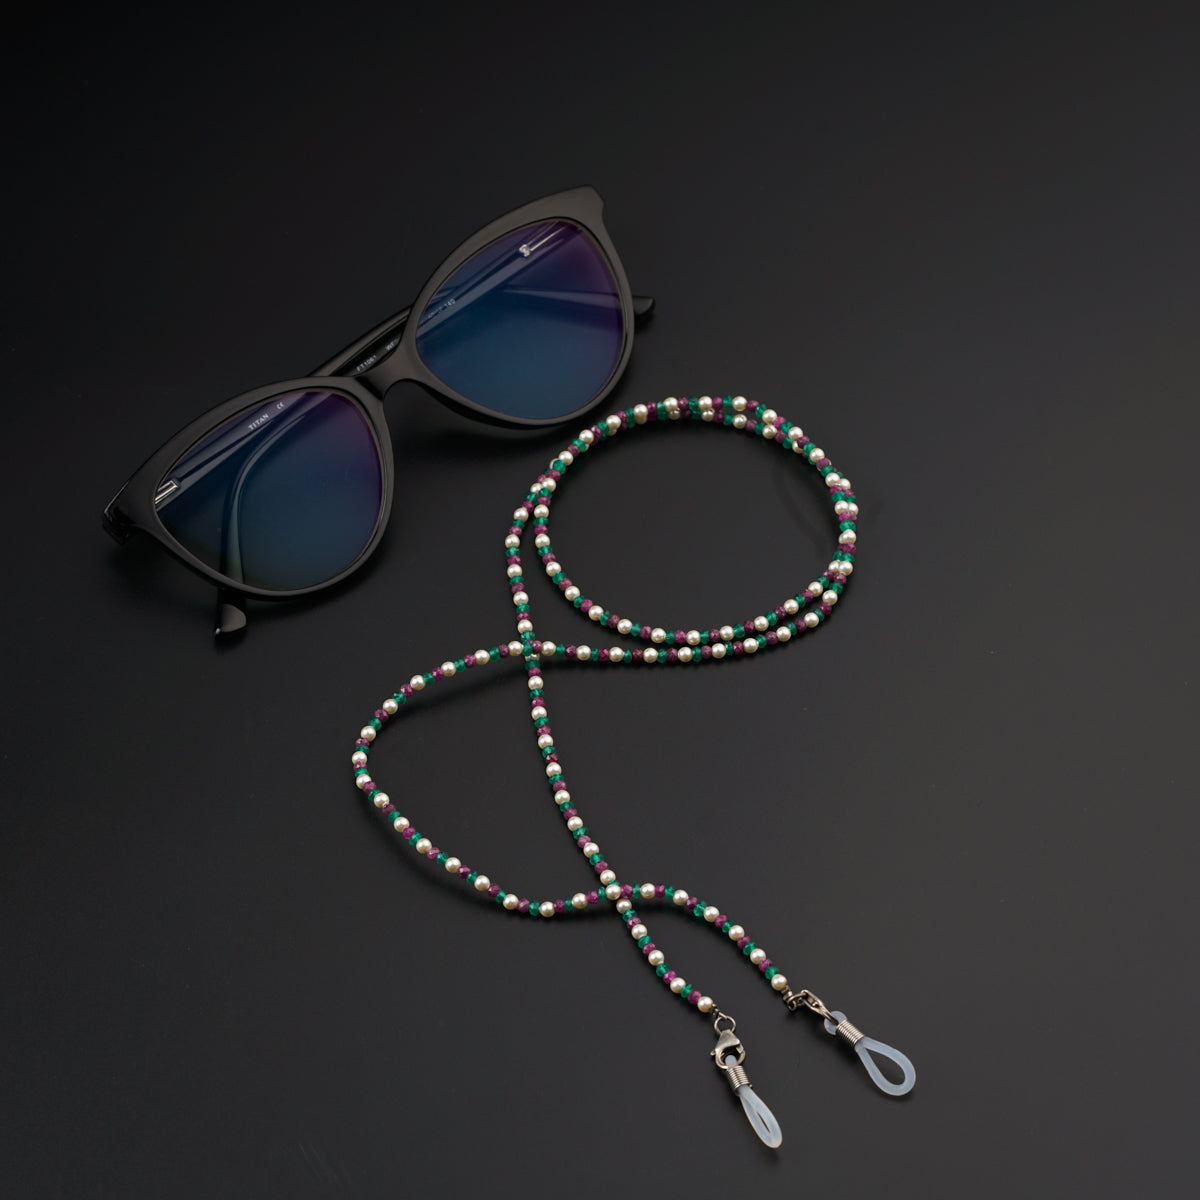 a pair of sunglasses and a beaded lanyard on a black surface